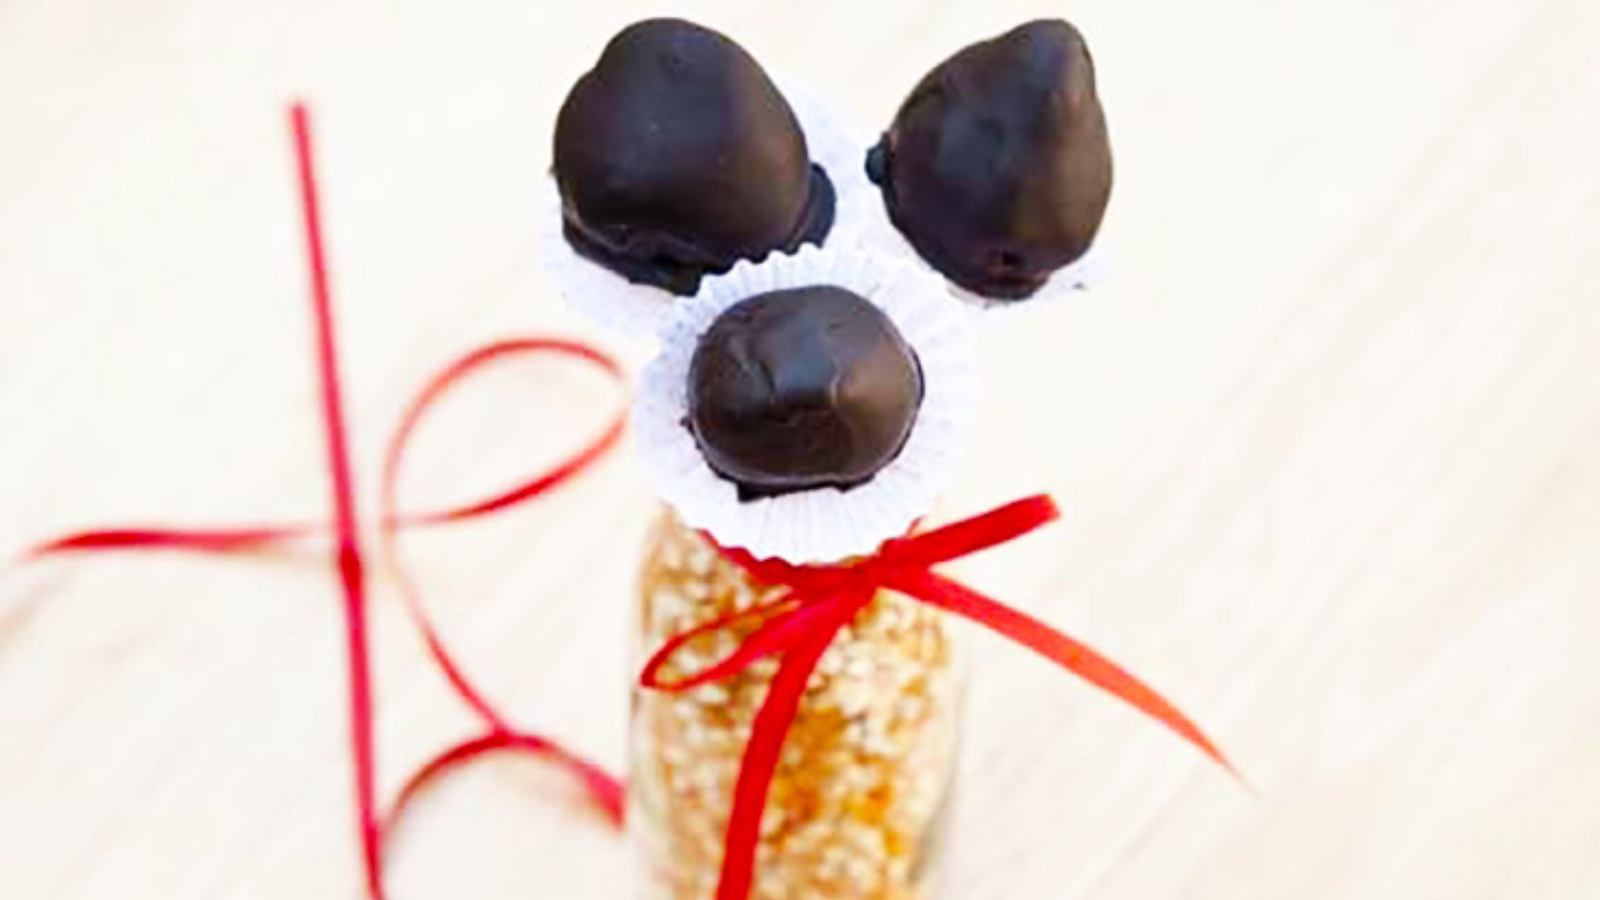 A jar filled with popcorn and tied with a red ribbon holds three Healthy Chocolate Covered Strawberries on sticks.